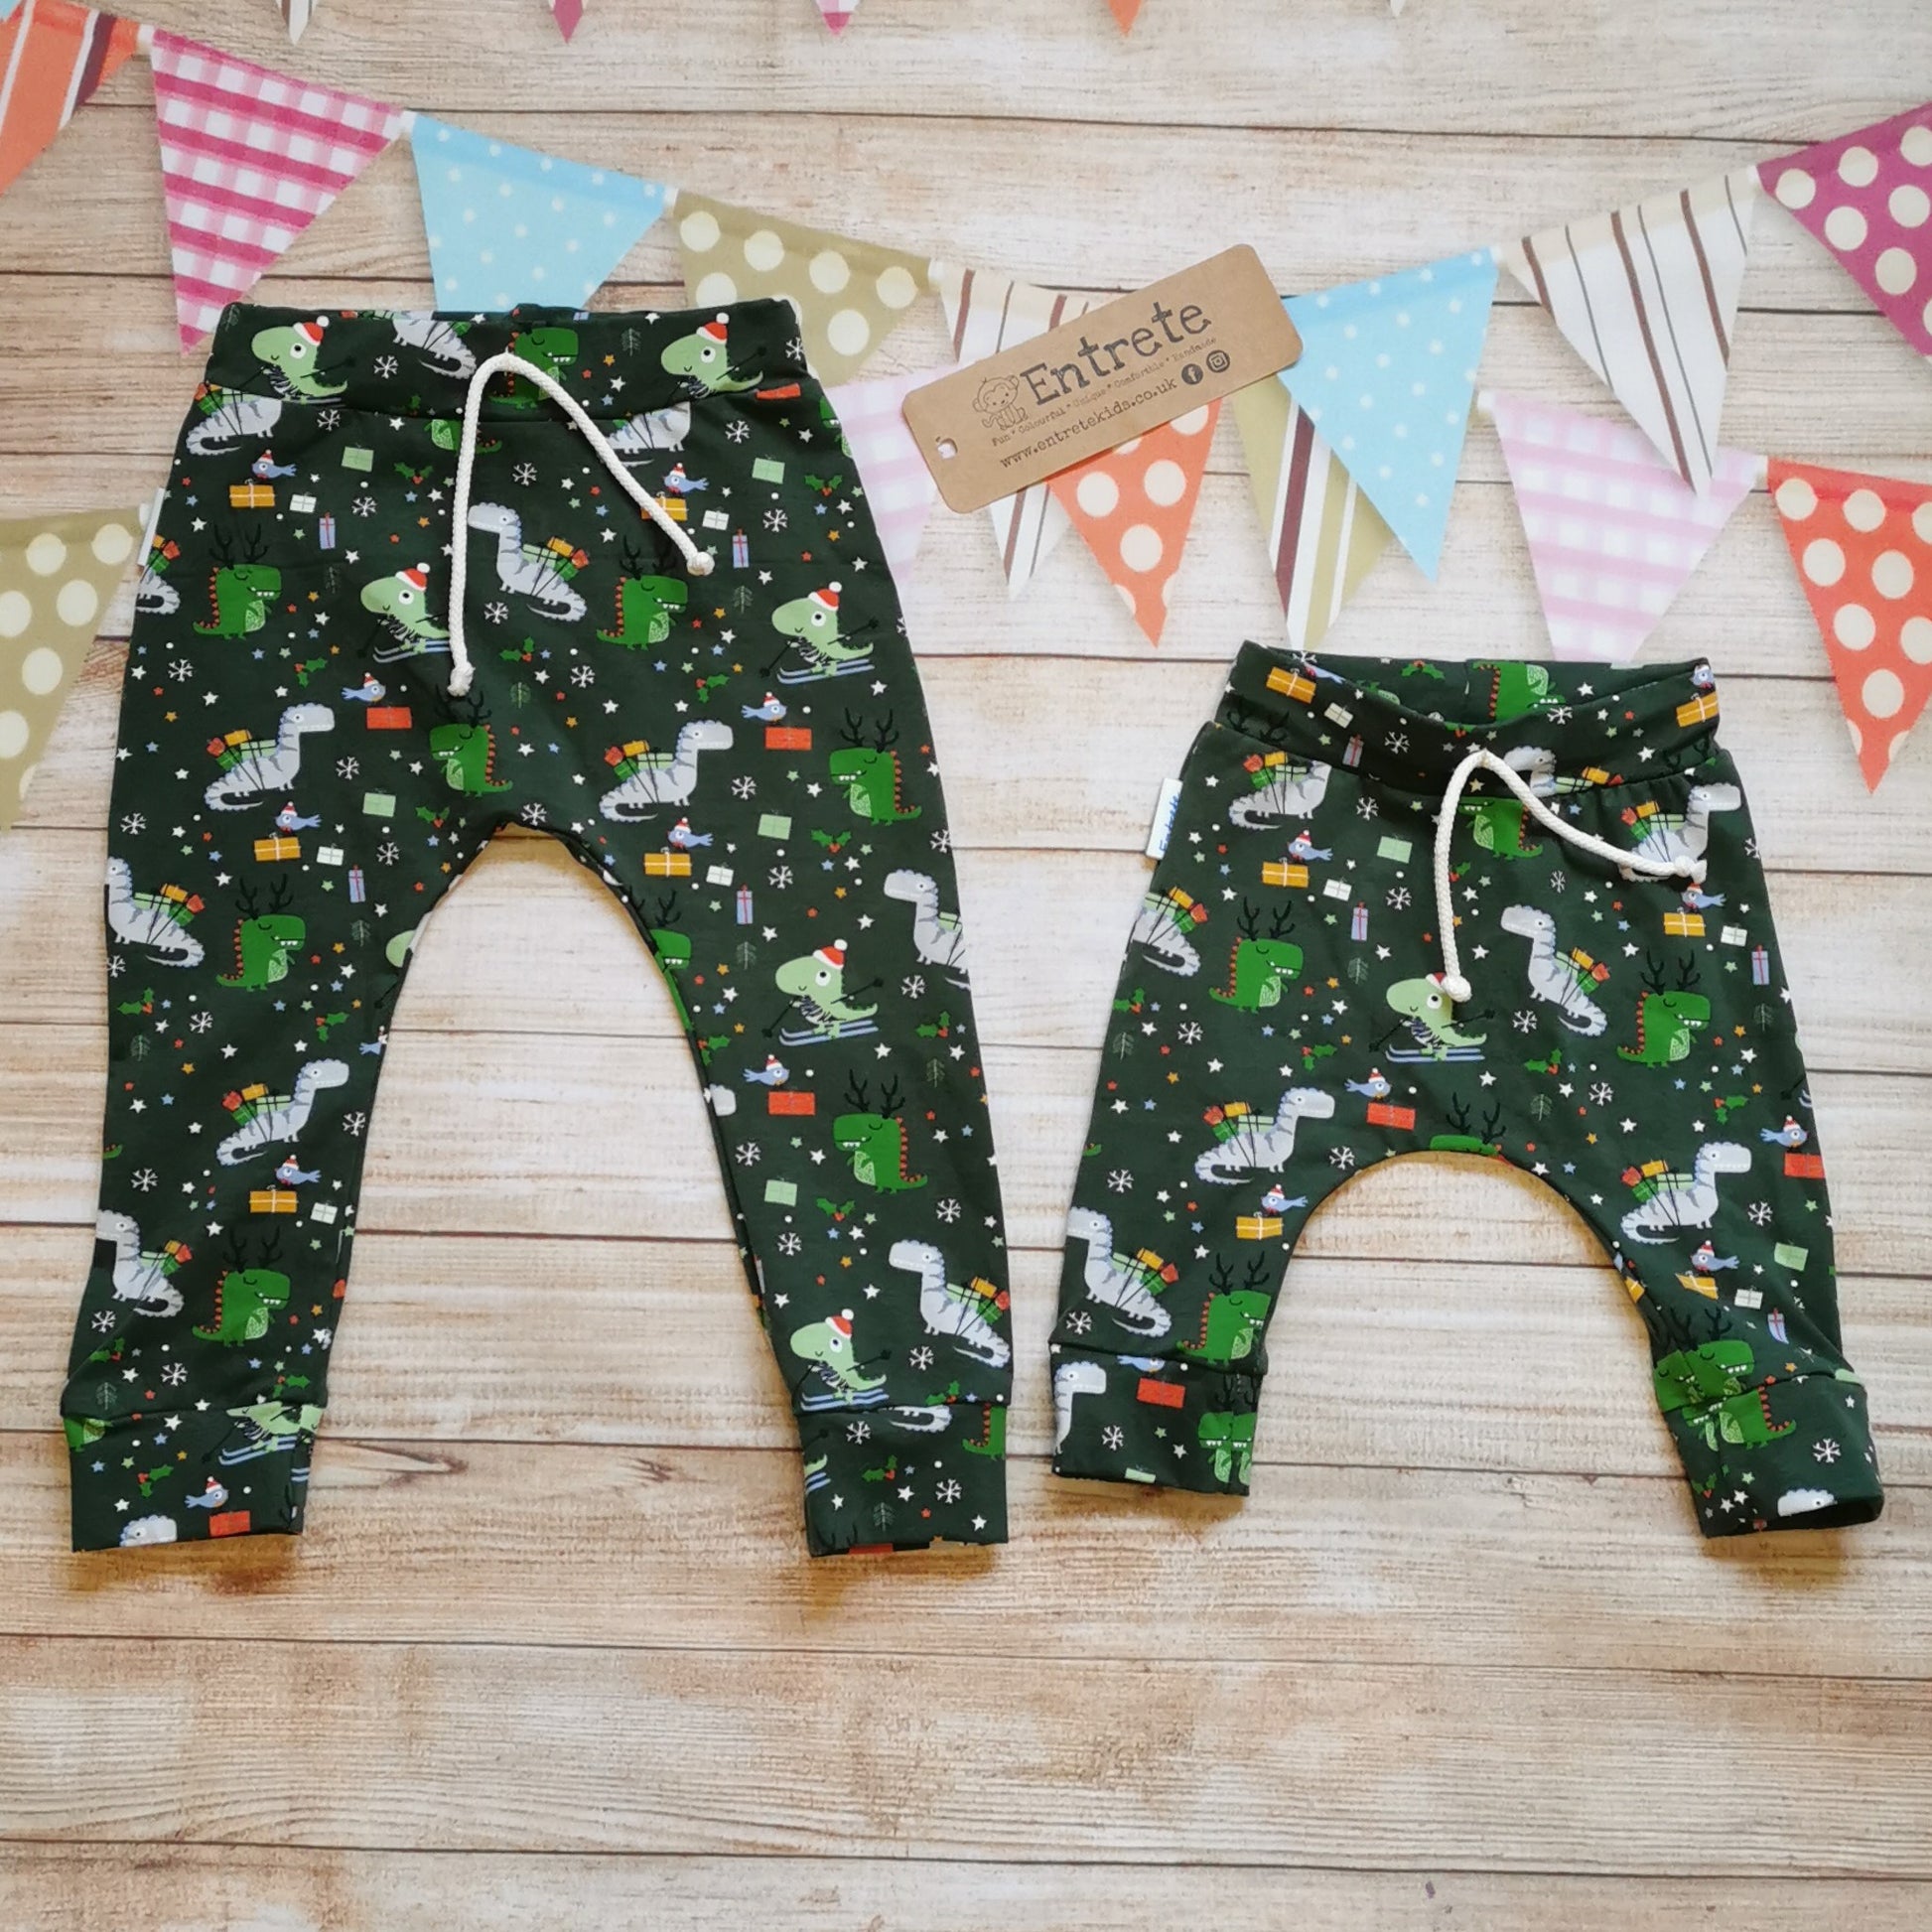 Harem joggers with elasticated waist, dropped crotch and roll-able ankle cuffs. Handmade in dark green festasaurus cotton jersey. Perfect for your little dinosaur fanatic! Shown as a matching set (you are buying one pair of harem joggers)